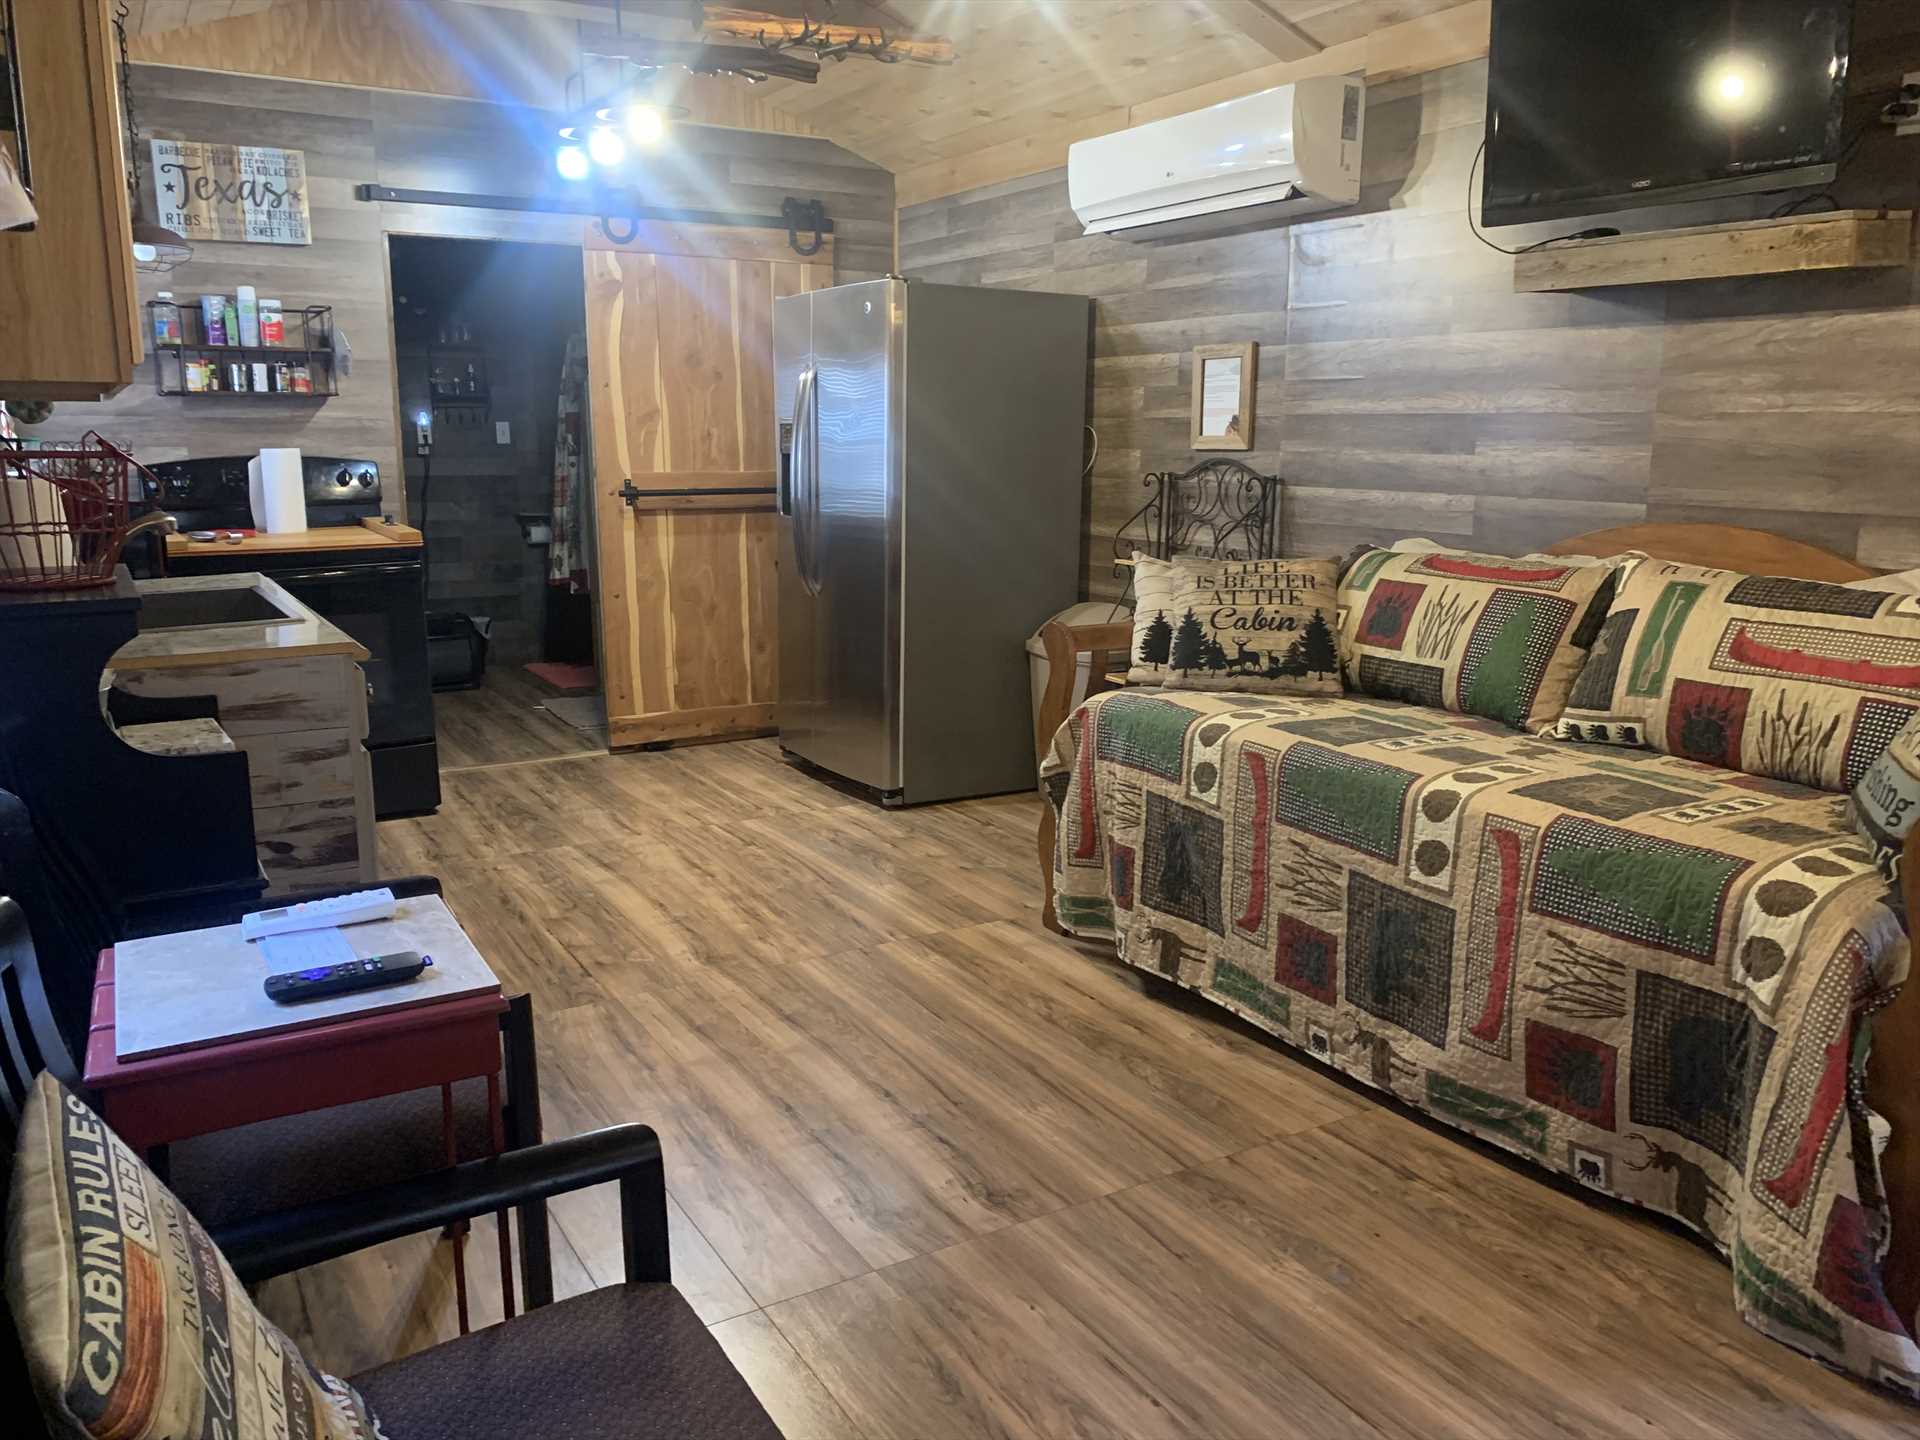                                                 Efficient AC and heat units assure the cabin will be comfortable for you and your folks, no matter what time of year you stop by.